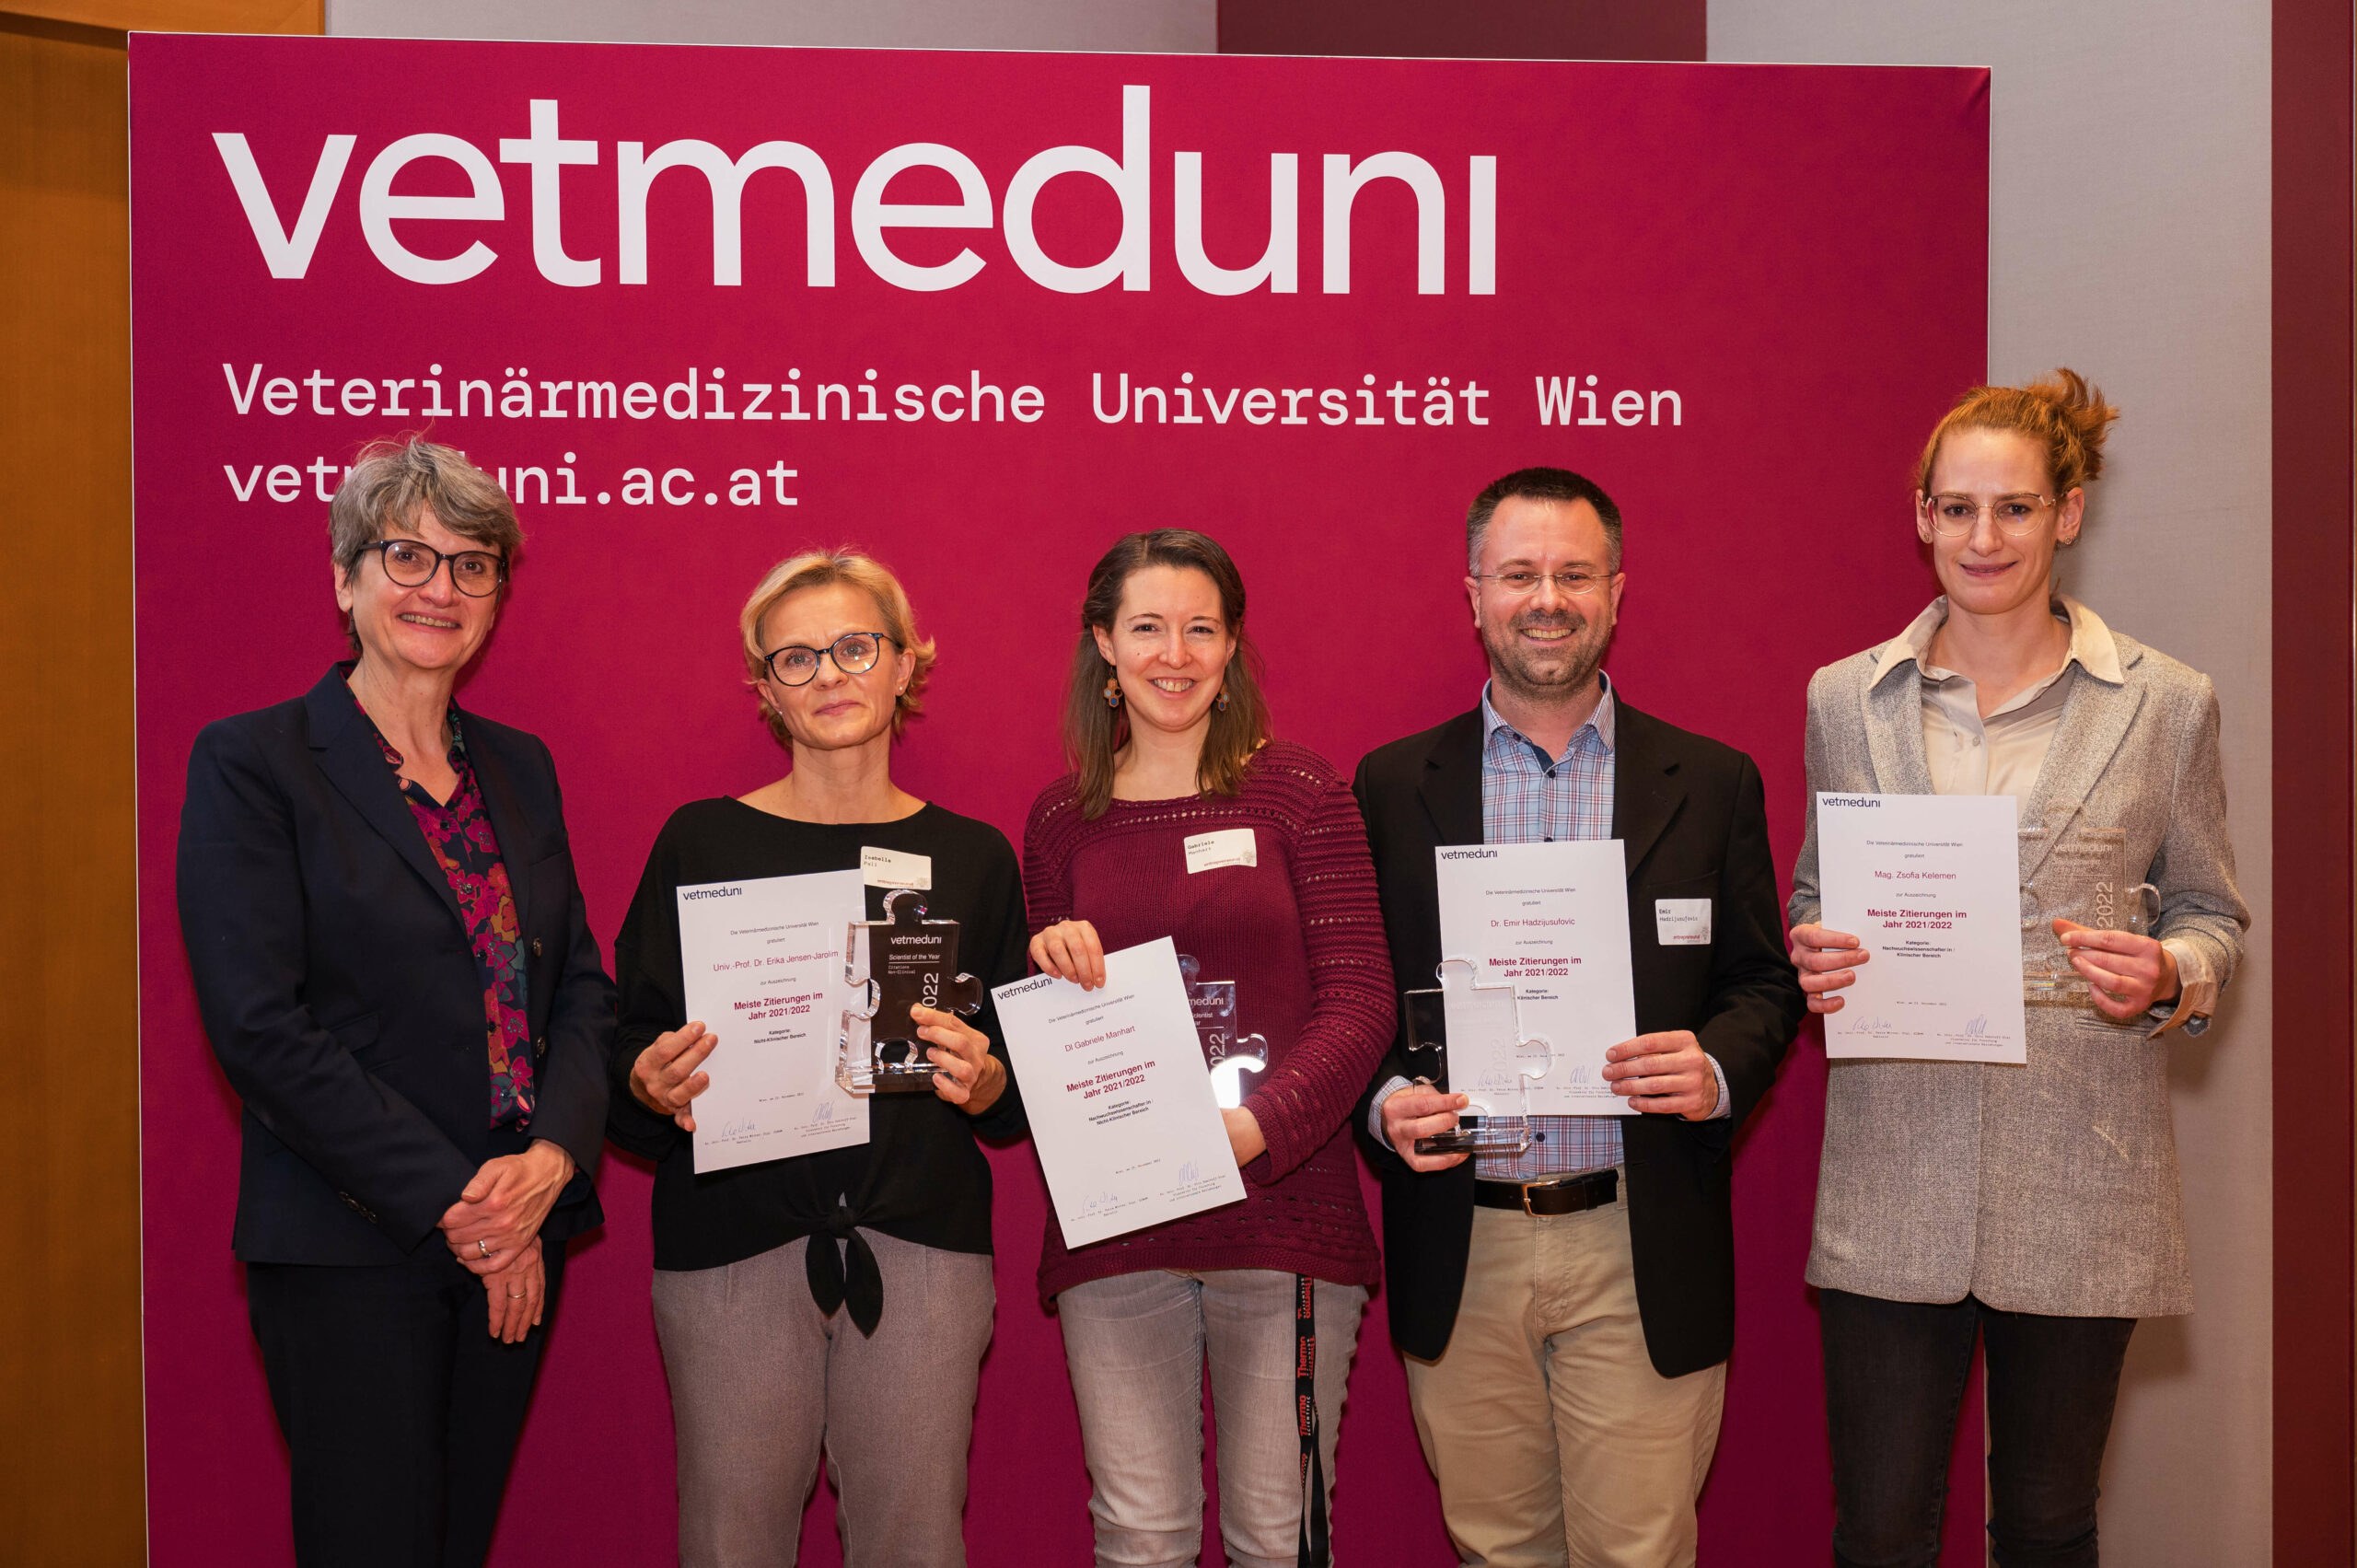 Emir Hadzijusufovic honored as the Most Cited Scientist (clinical area) and Inventor of the Year at the Vetmeduni Vienna